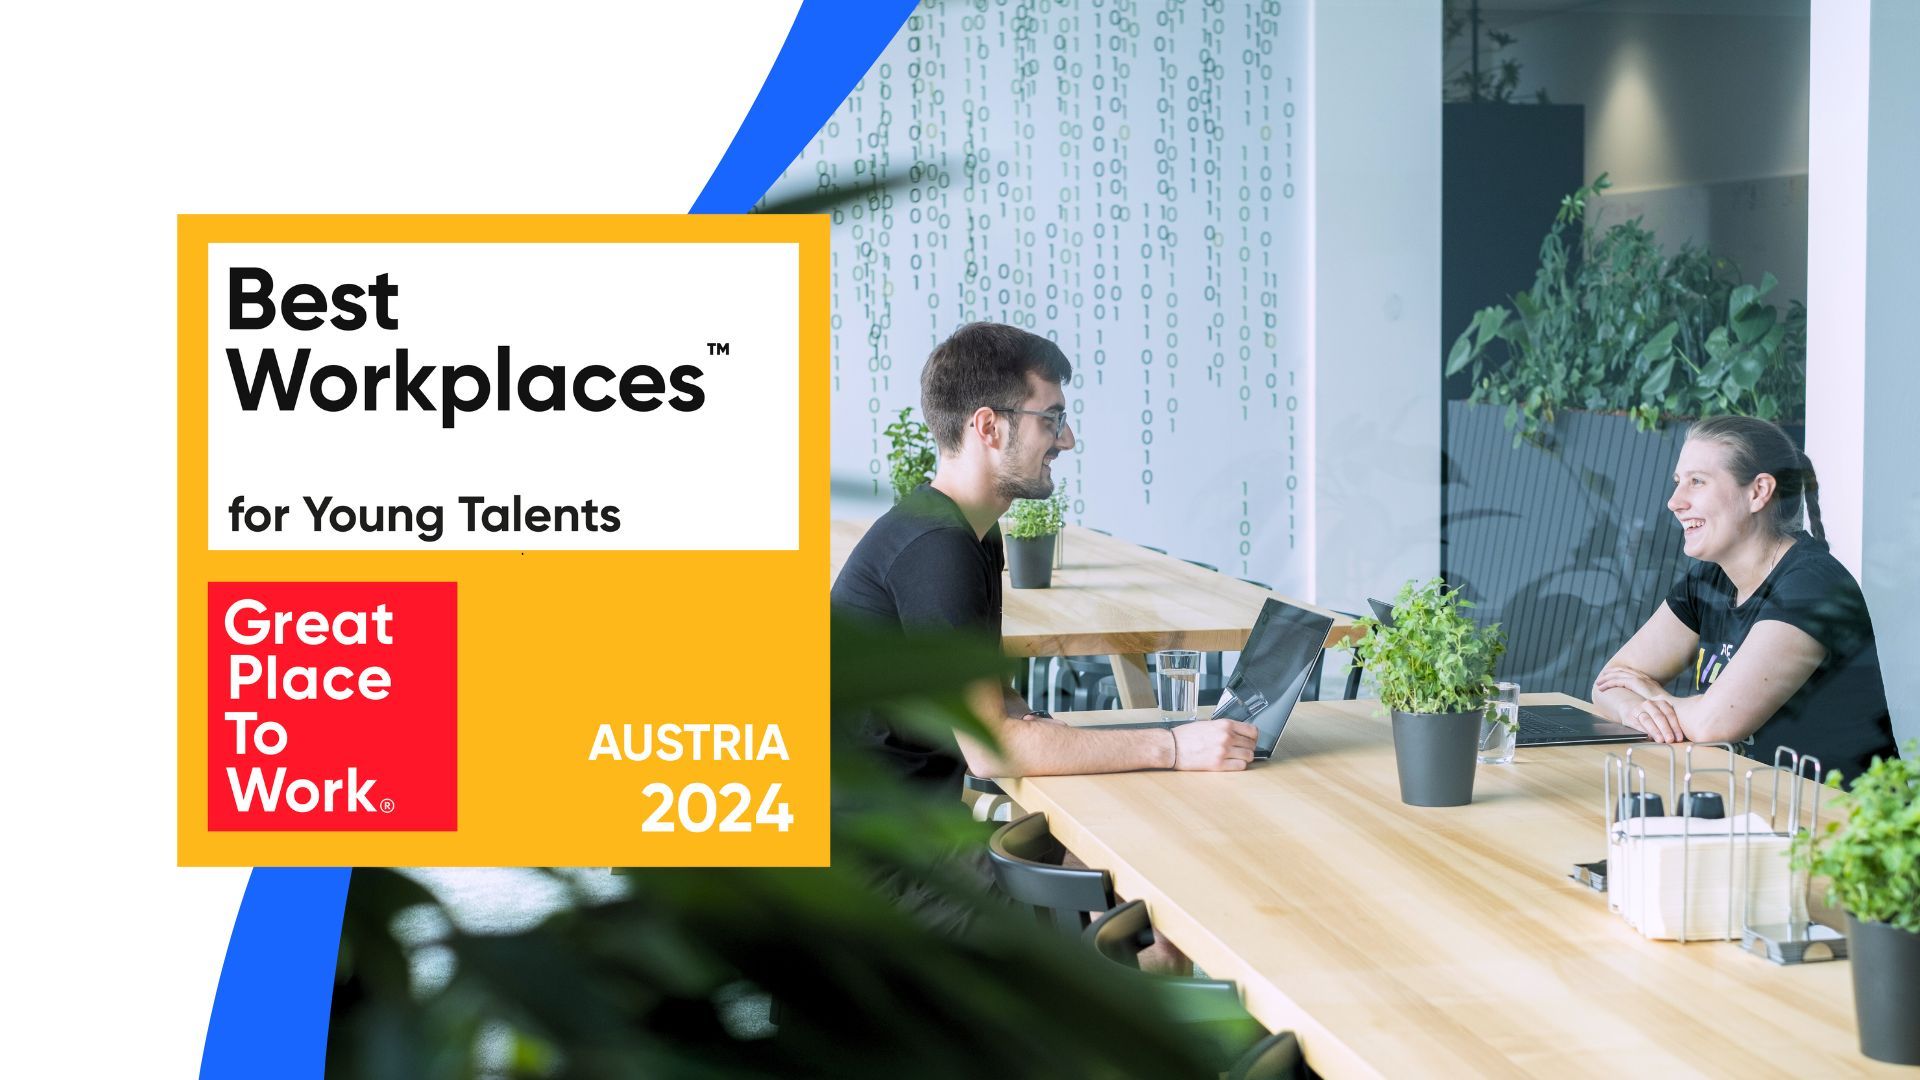 #1 Best Workplace for Young Talents 2024